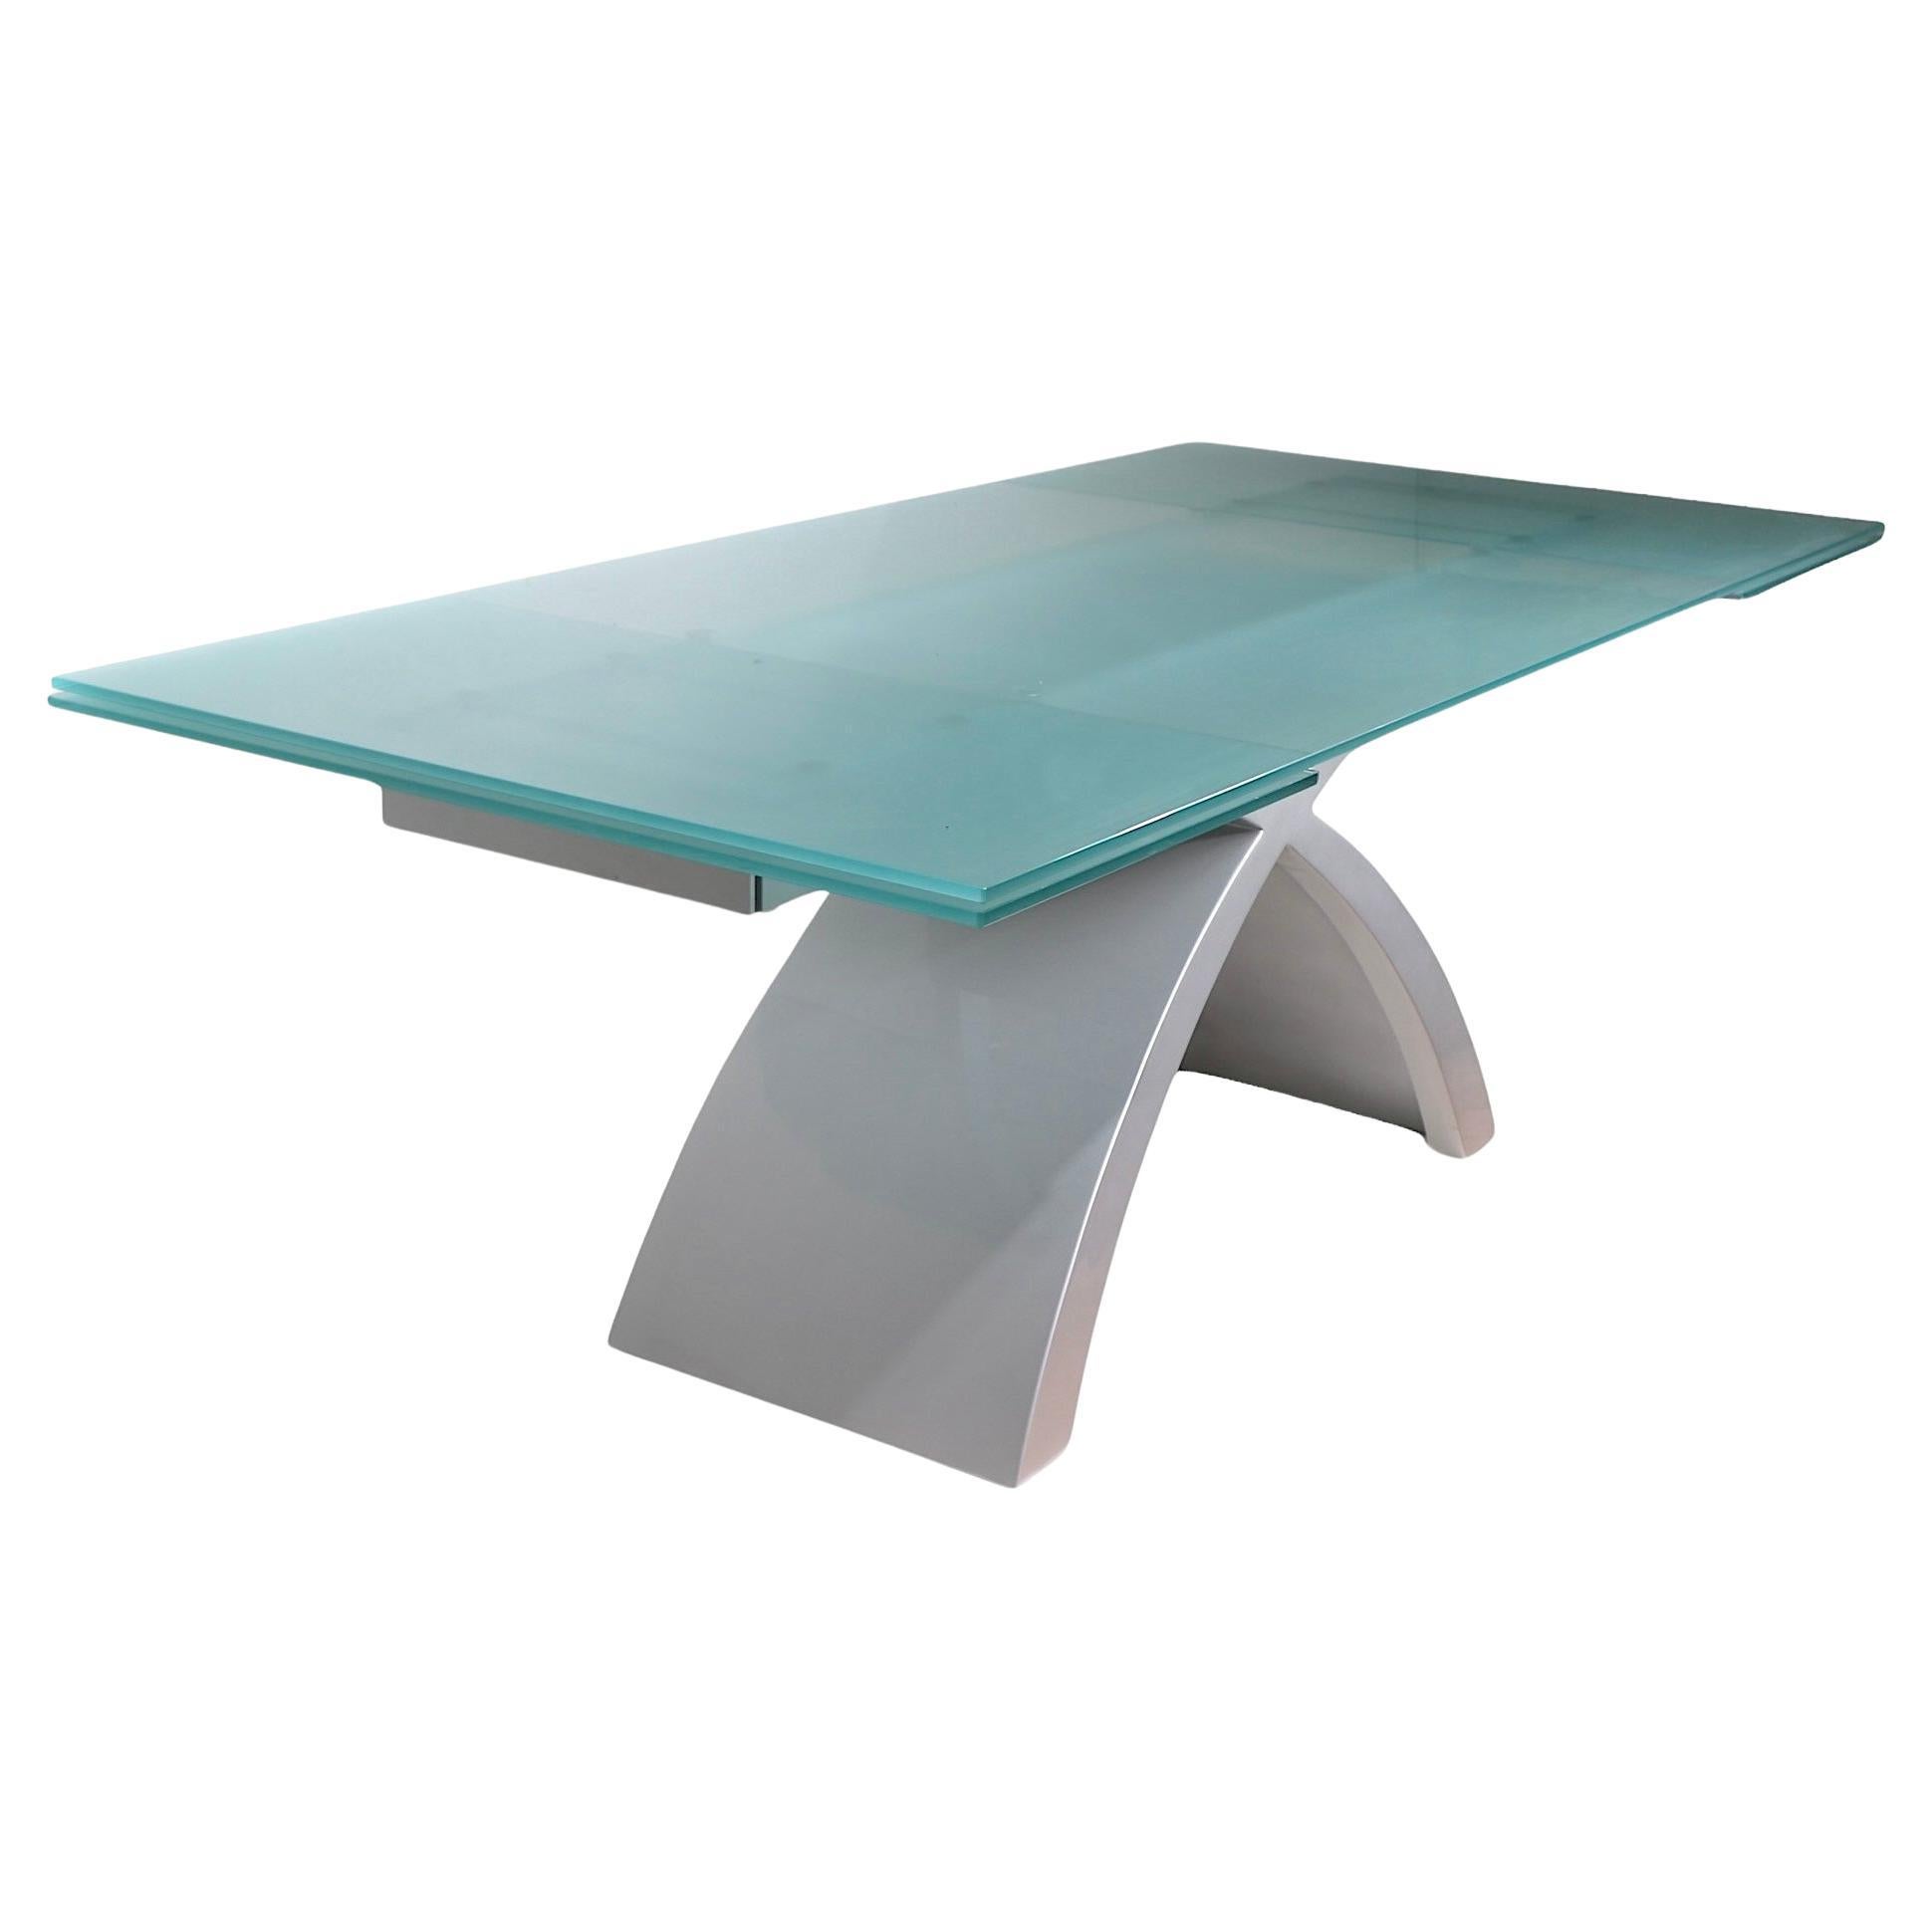  Italian Post Modern Contemporary  Extension Dining Table Tokyo by Tonin  For Sale